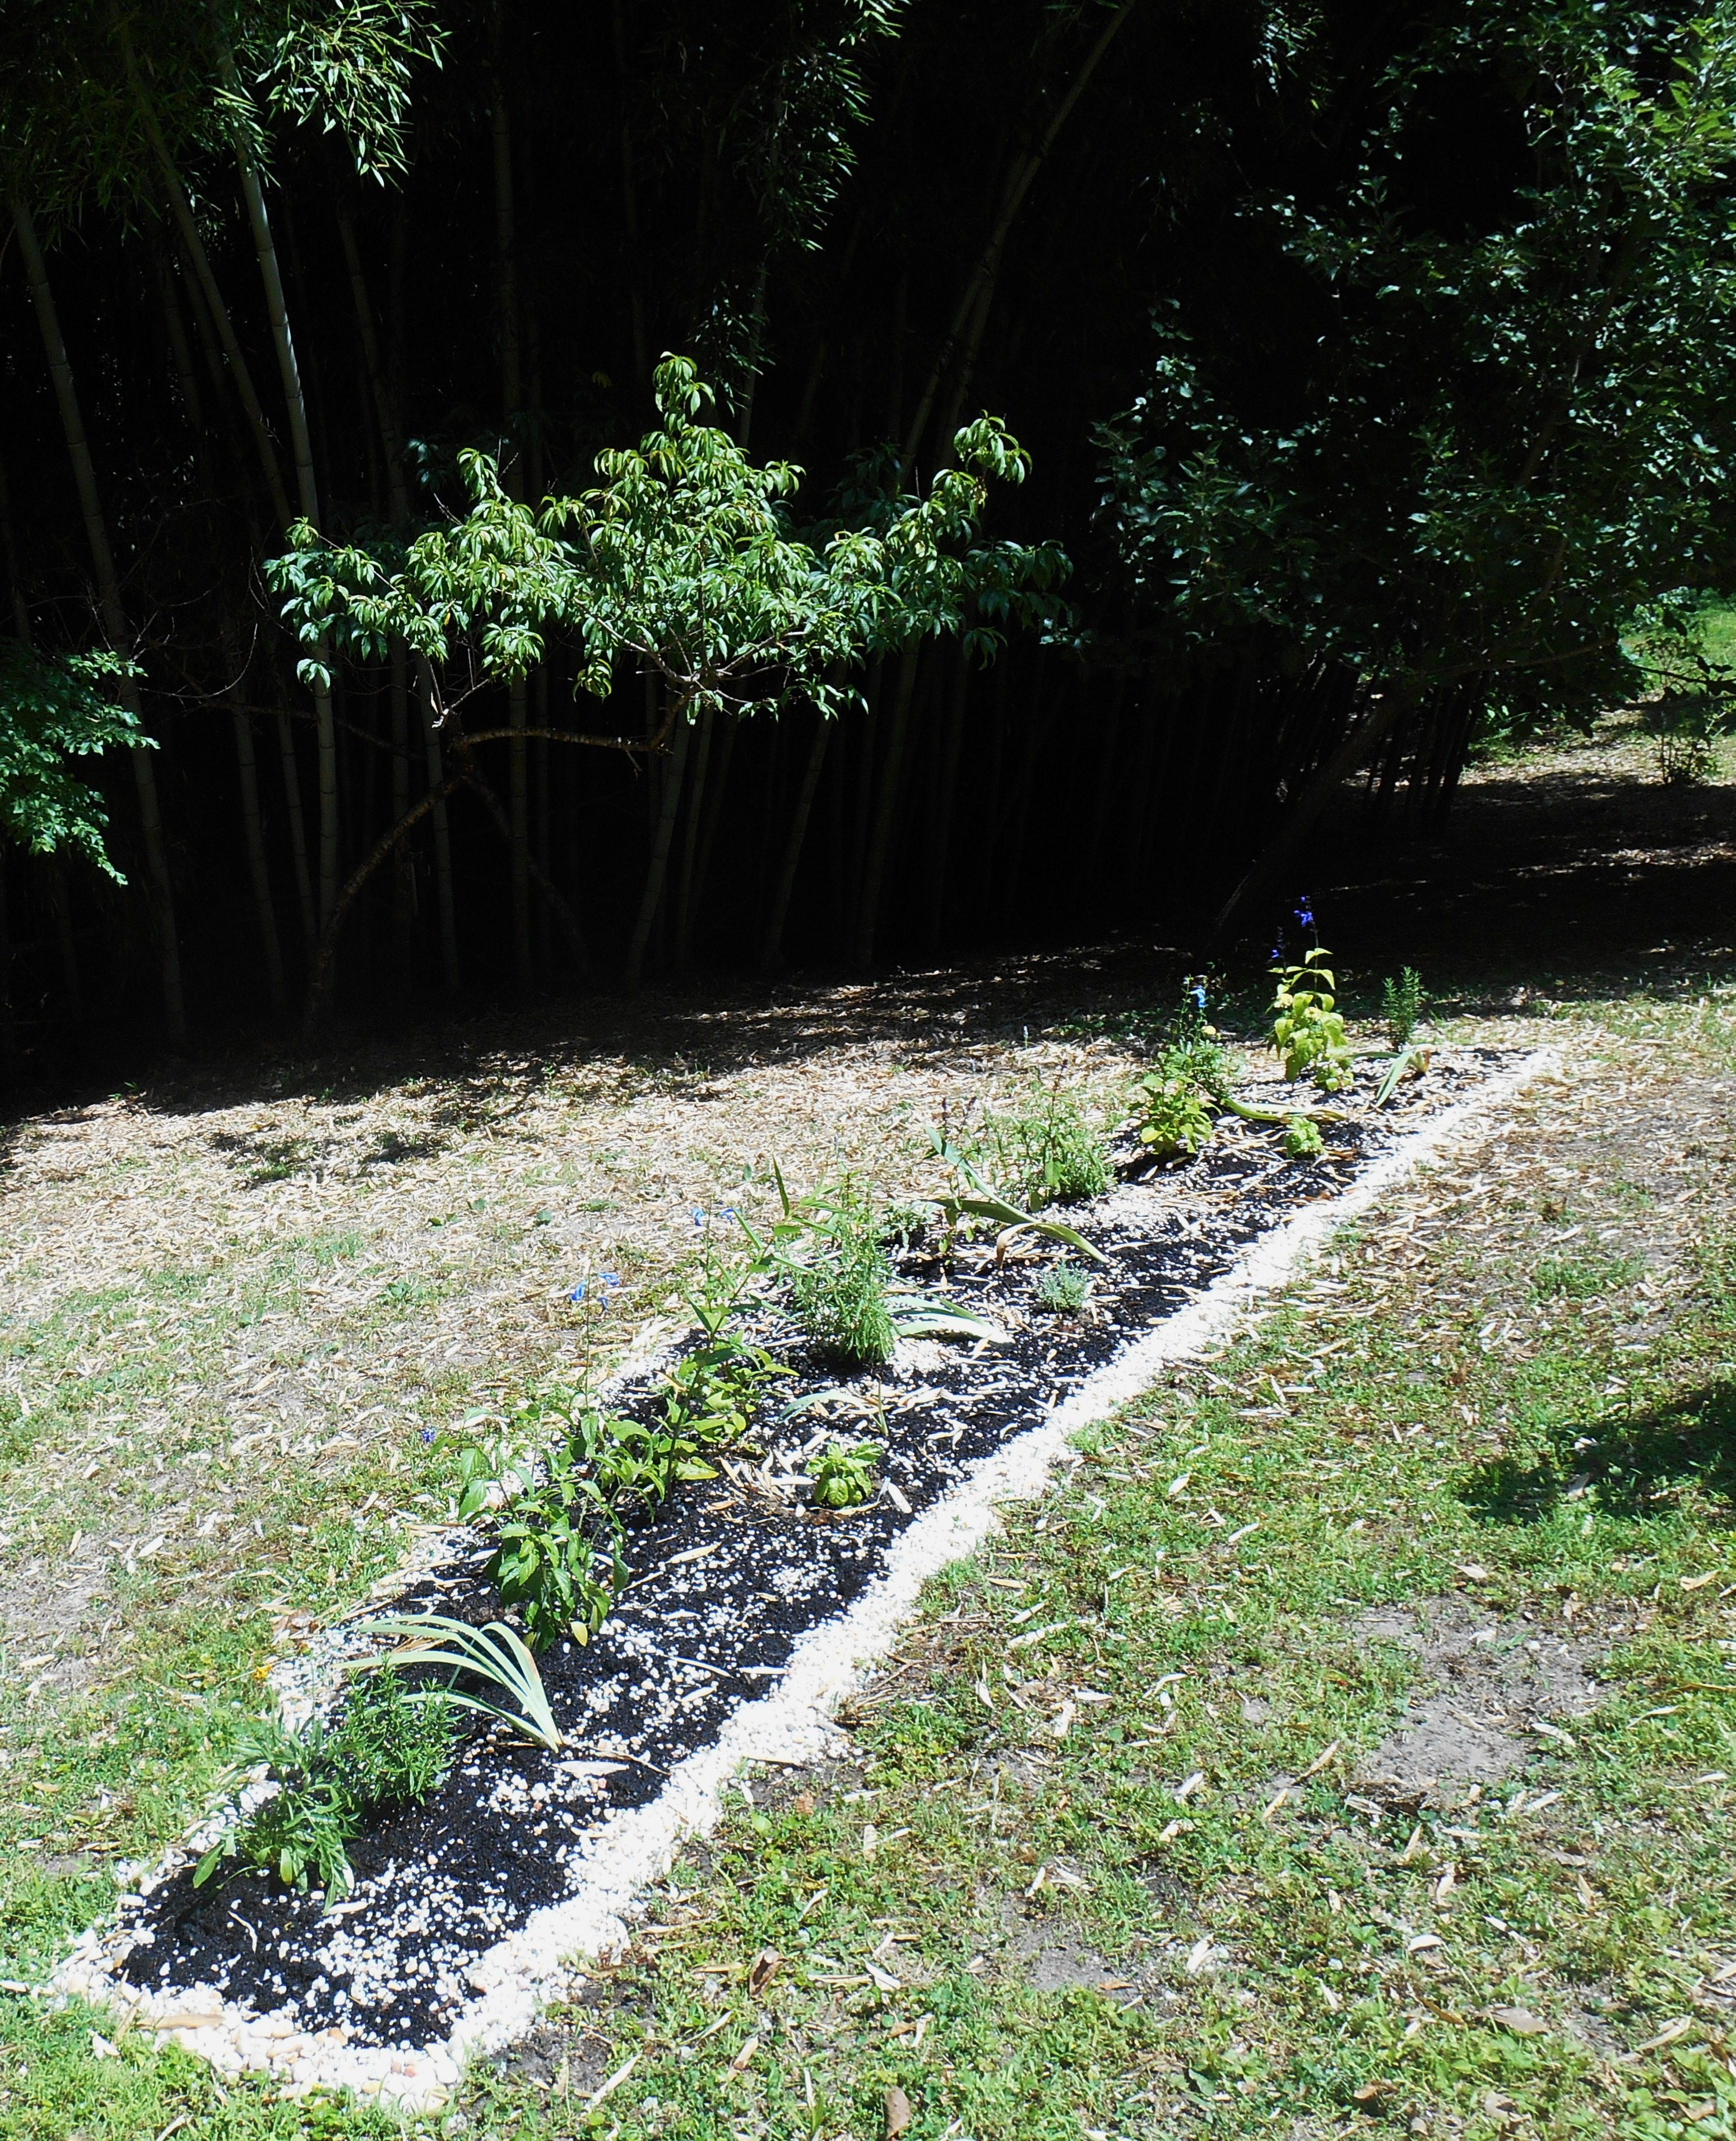 The bed is located in full sun on sloping land near the bottom of our garden.  Our bamboo forest grows out of the ravine to the left in this photo.  The leaves littering the ground have fallen from the bamboo in our recent hot weather.